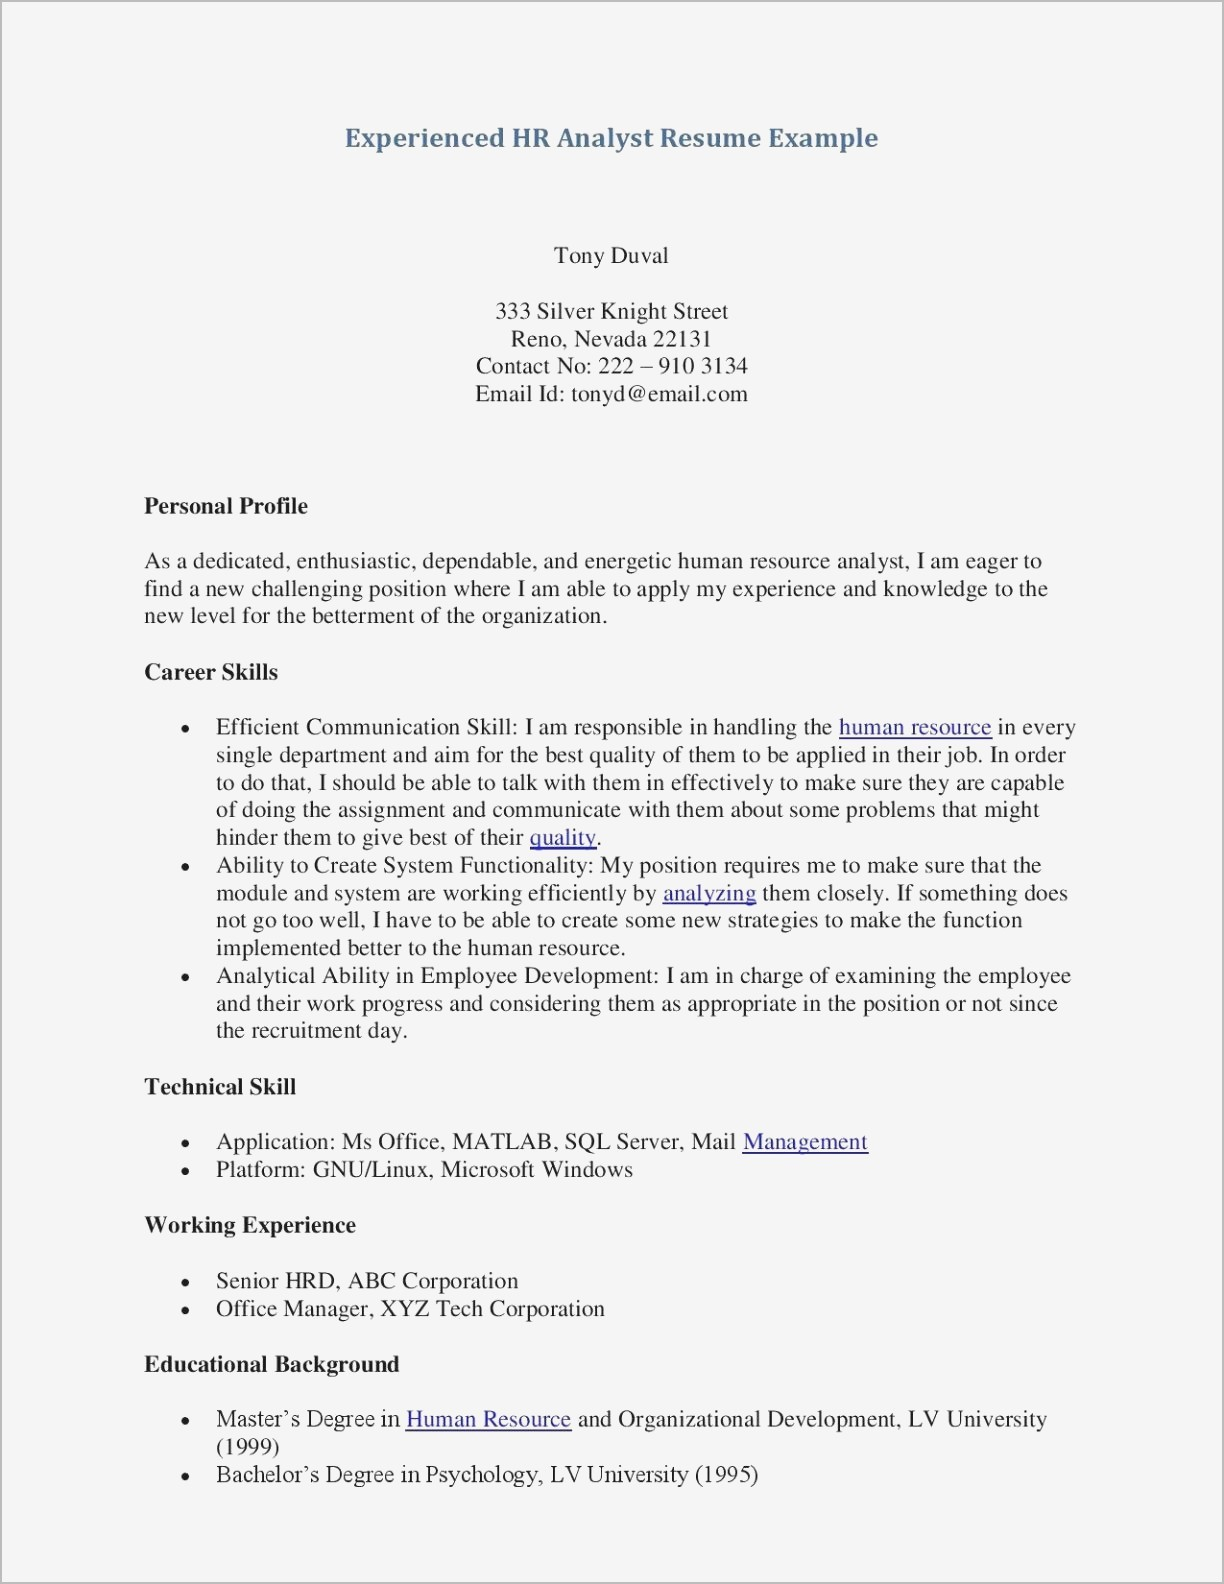 Support Letter Template - Case for Support Template